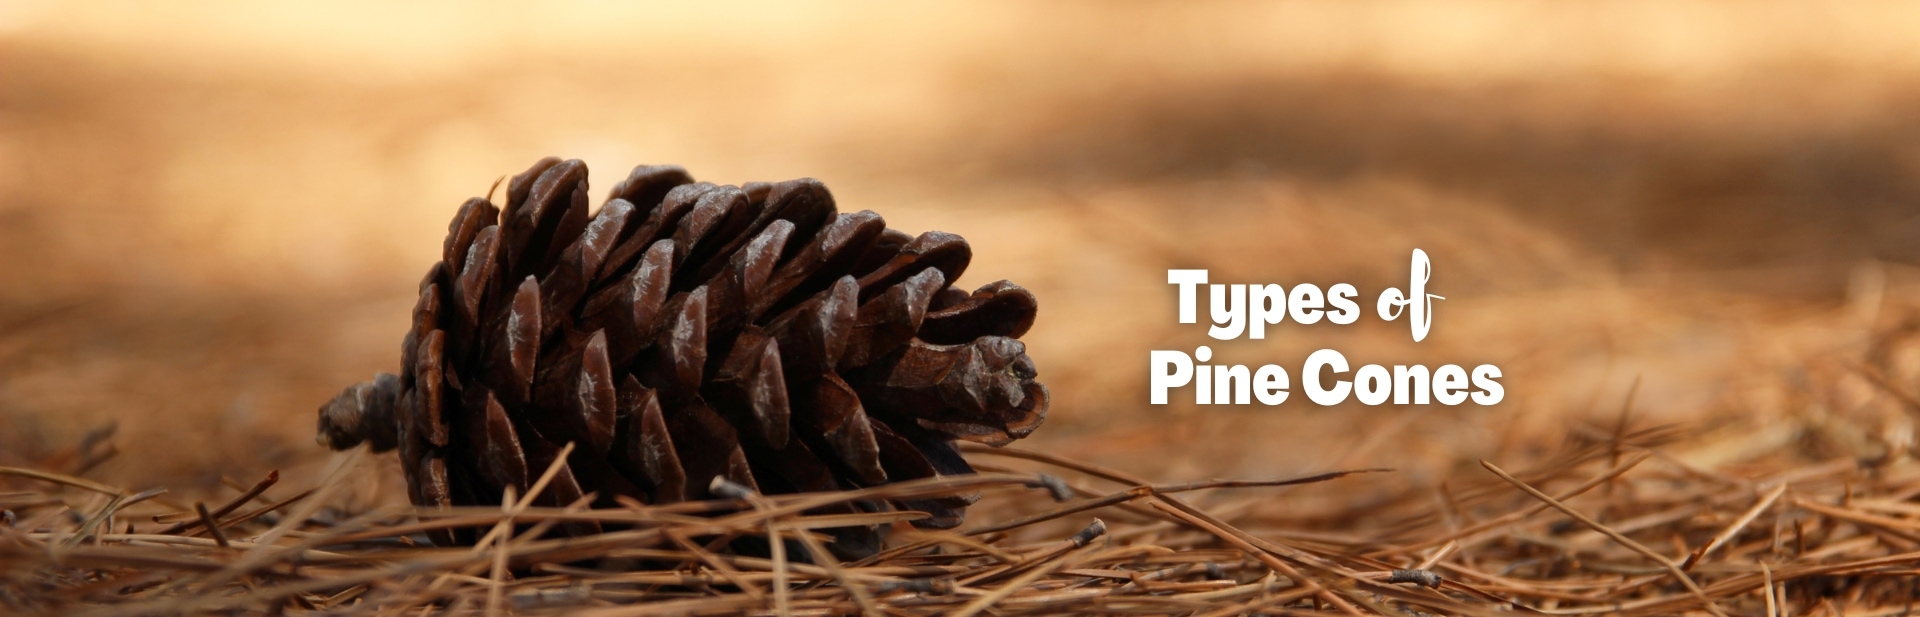 The 20 Weirdest and Most Amazing Types of Pine Cones